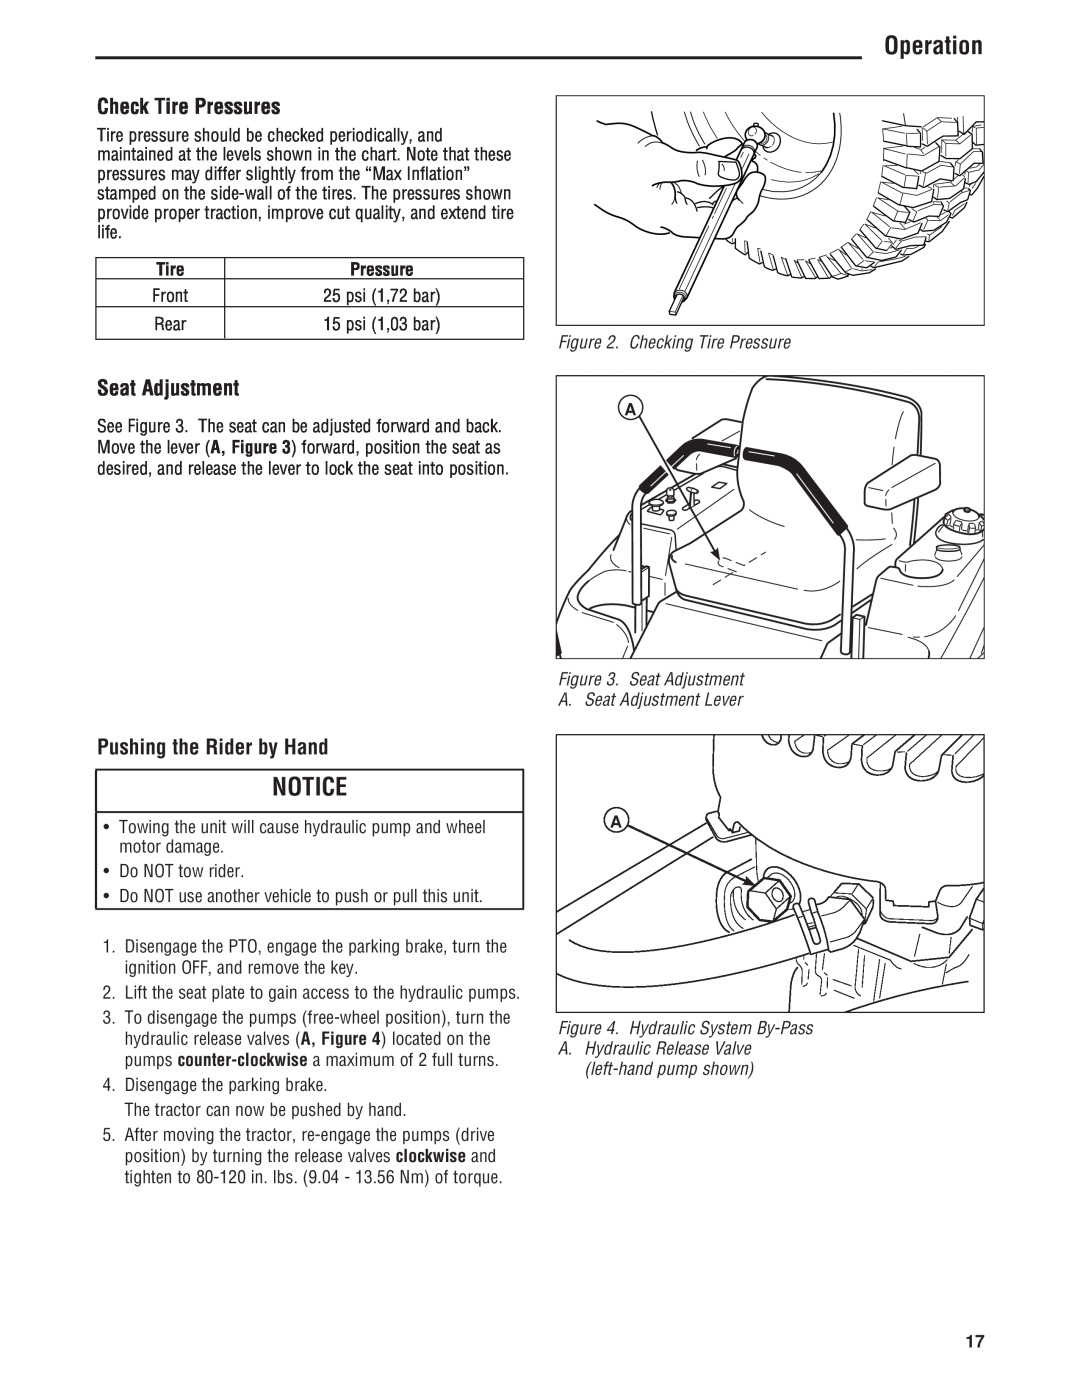 Simplicity 5101604 Check Tire Pressures, Seat Adjustment, Pushing the Rider by Hand, Operation, Checking Tire Pressure 